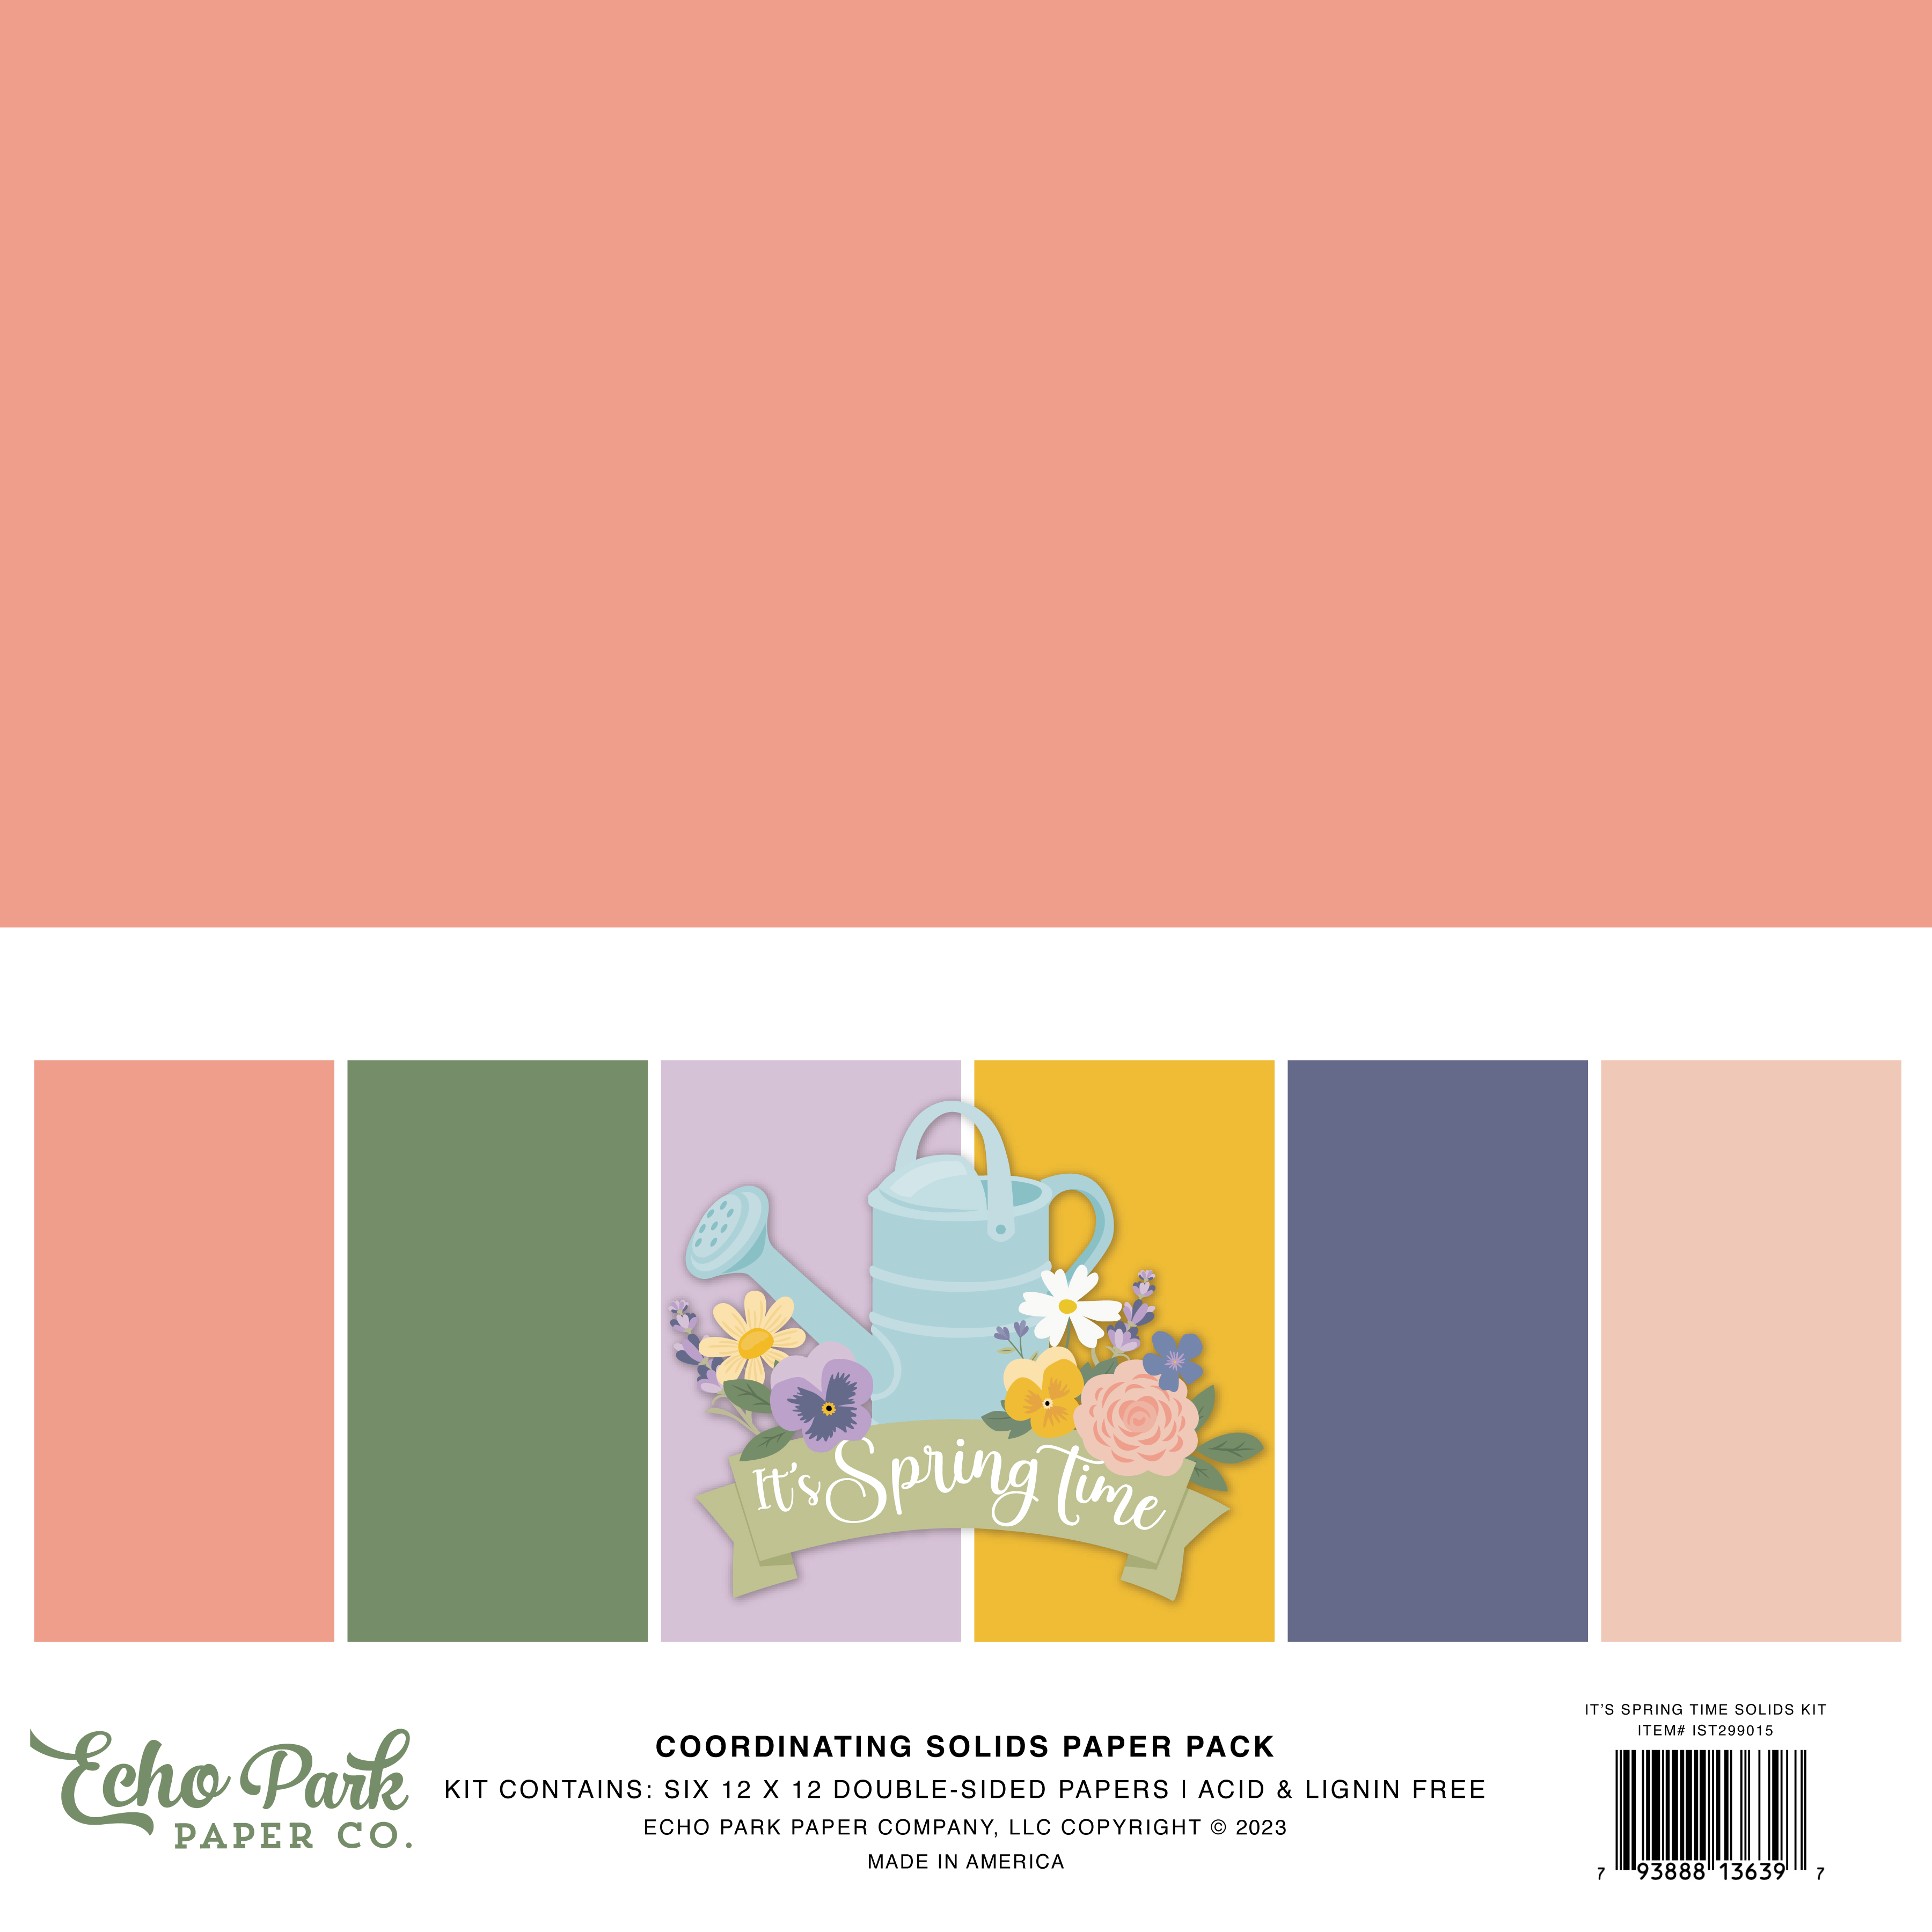 It's Spring Time Solids Kit